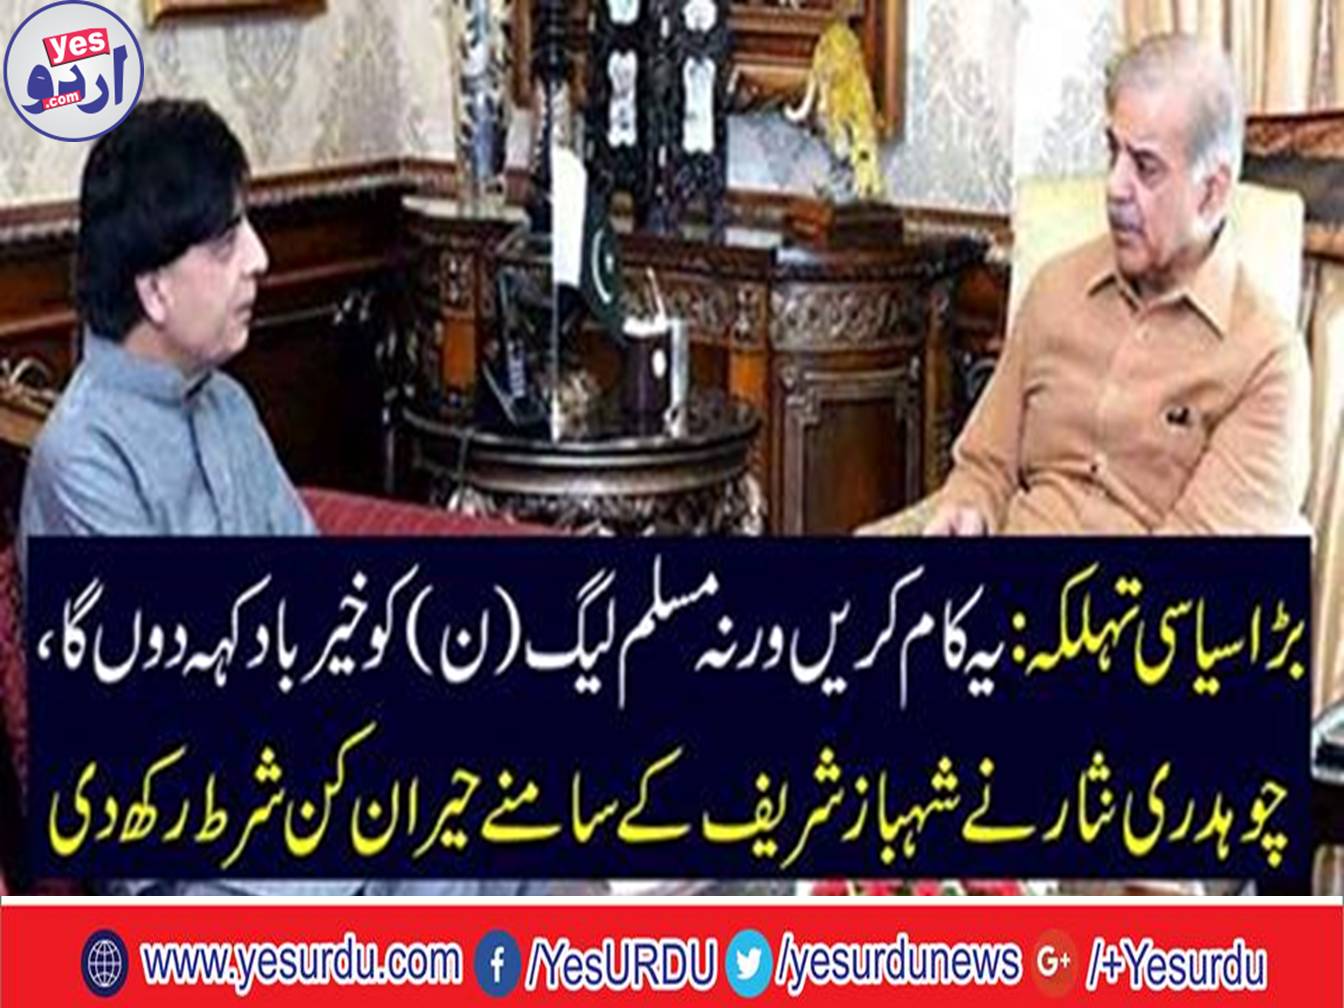 Chaudhry Nisar gave a surprise bet in front of Shahbaz Sharif